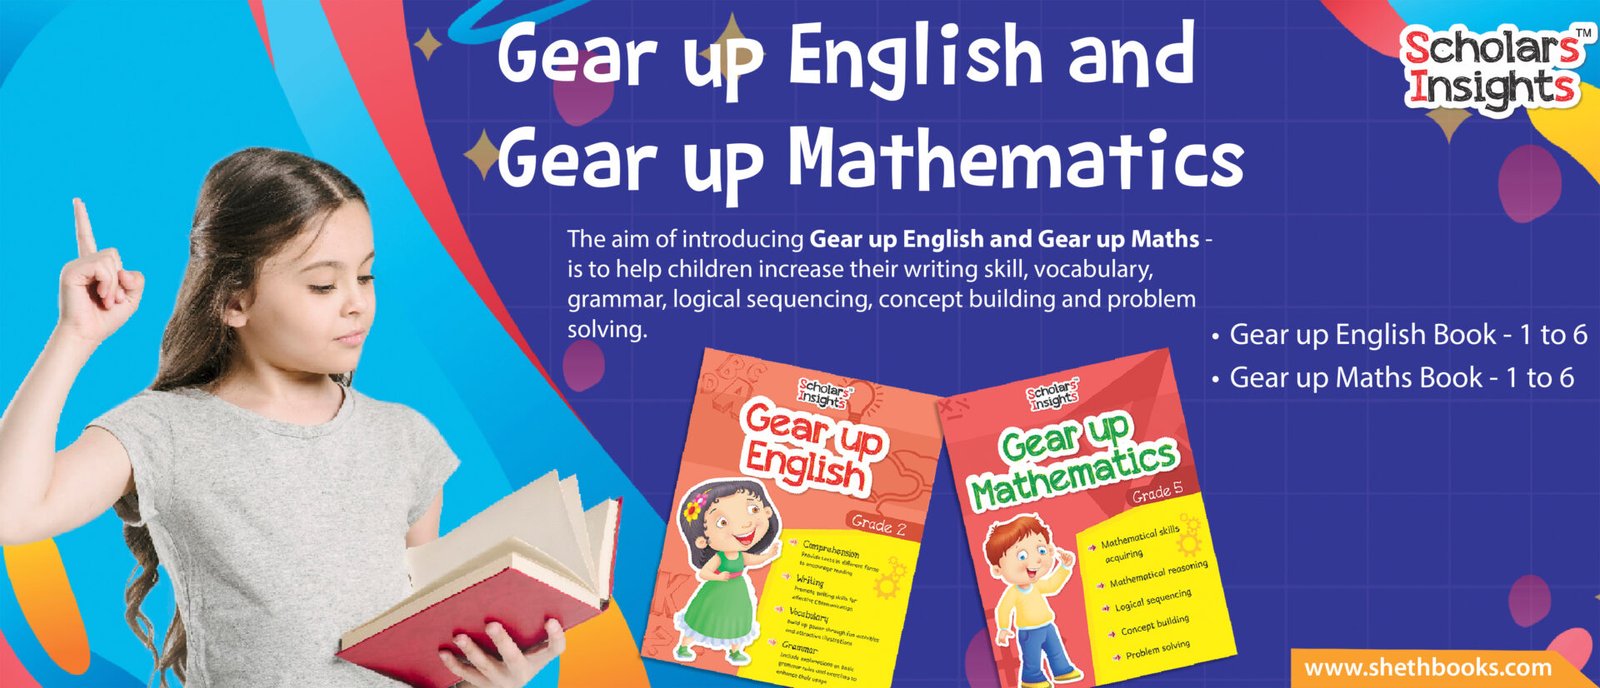 Gear up English and Maths